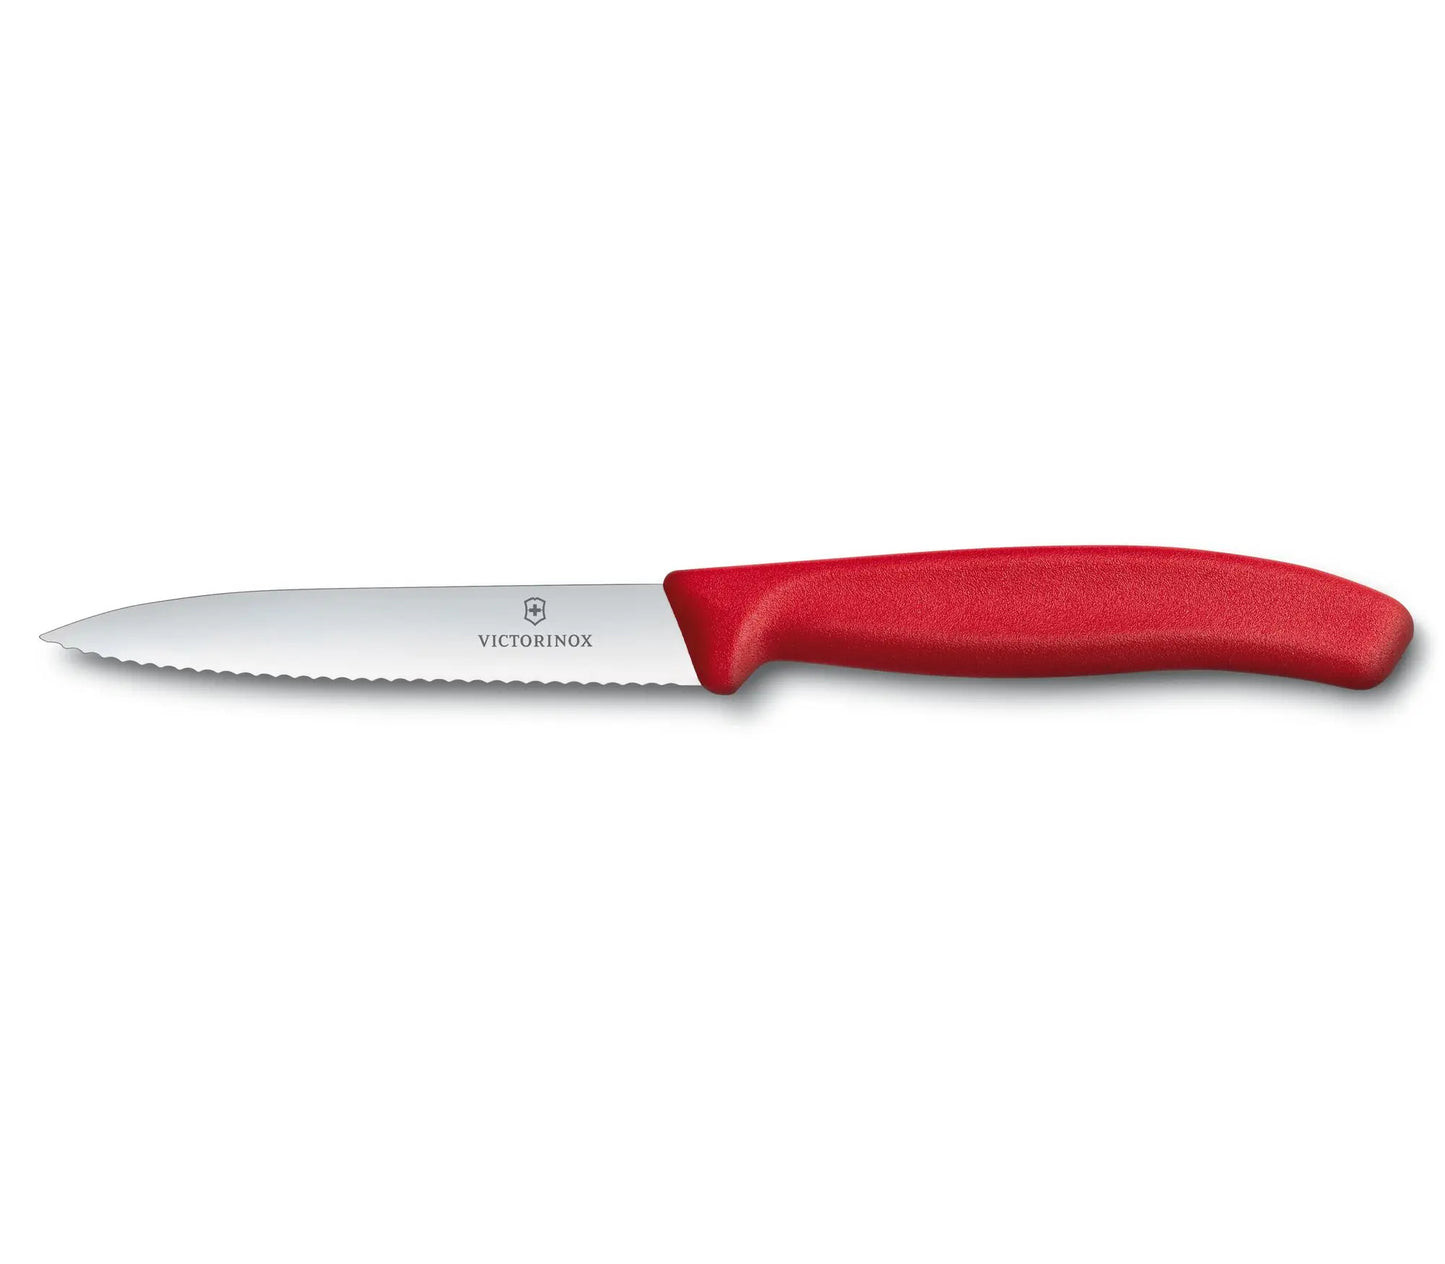 Victorinox Swiss Classic Serrated Paring Knife Pointed Tip - Red